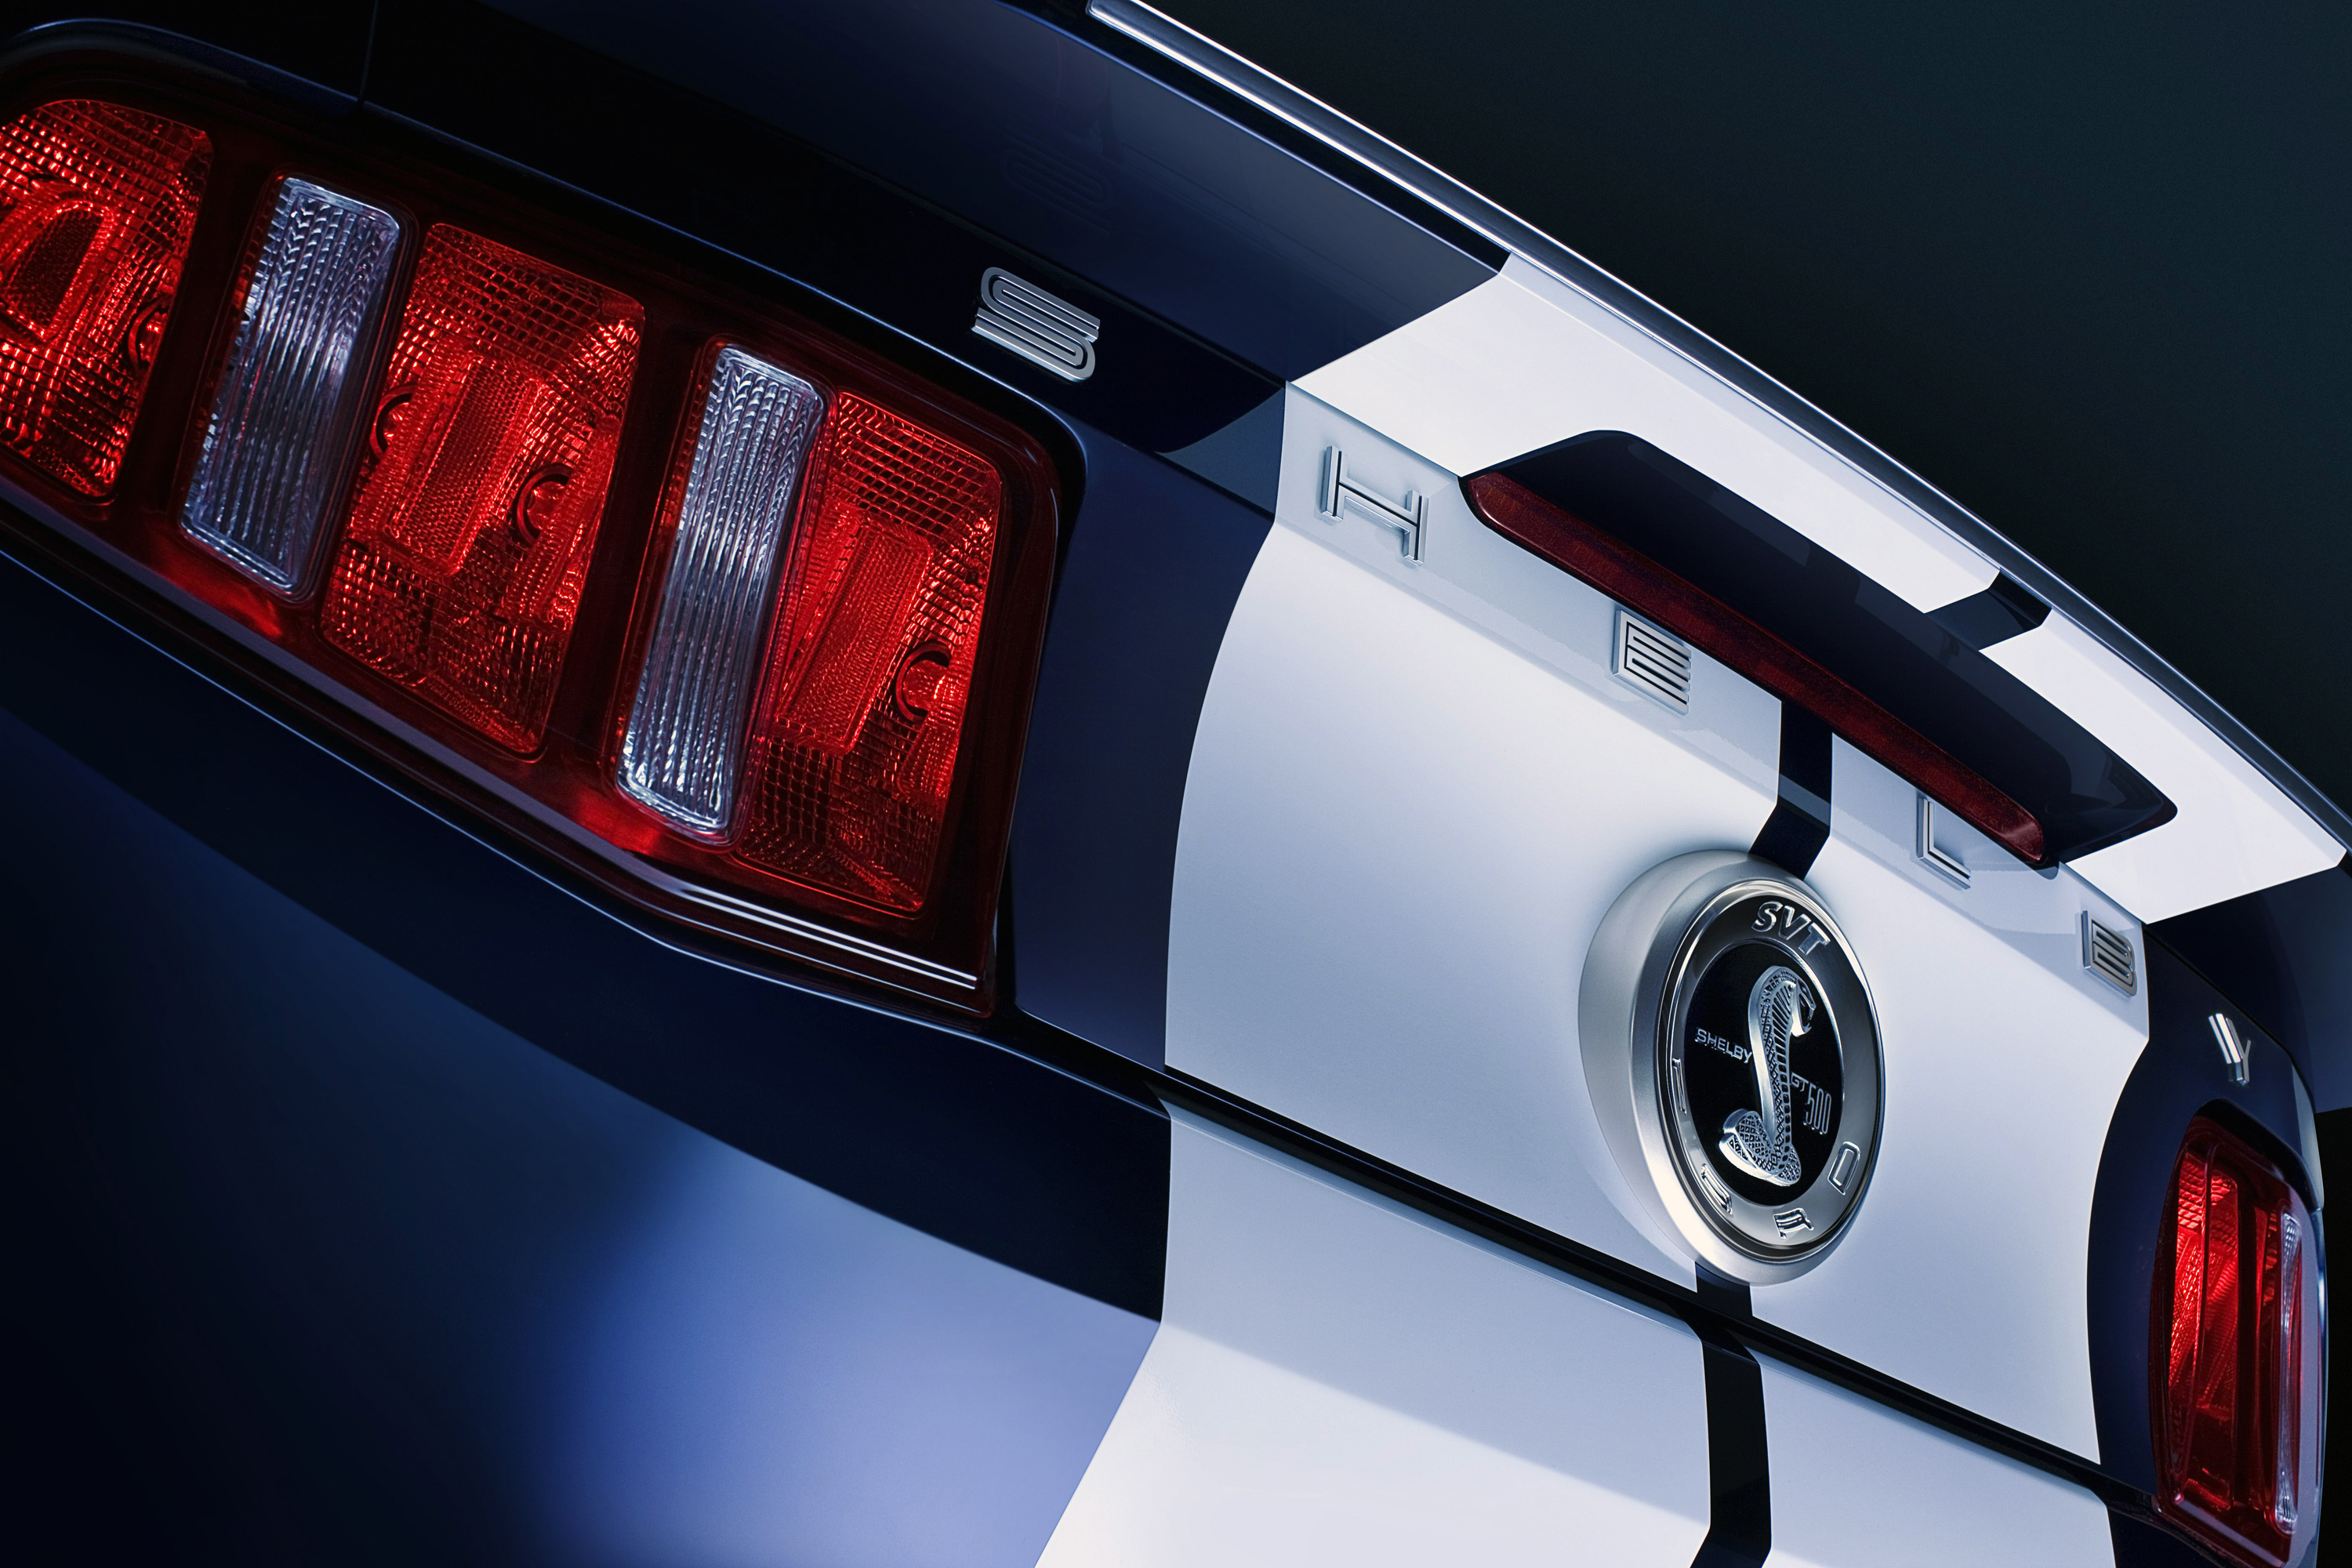 close-up, cars, Ford, muscle cars, back view, vehicles, Ford Mustang, Ford Shelby, low-angle shot, taillights - desktop wallpaper